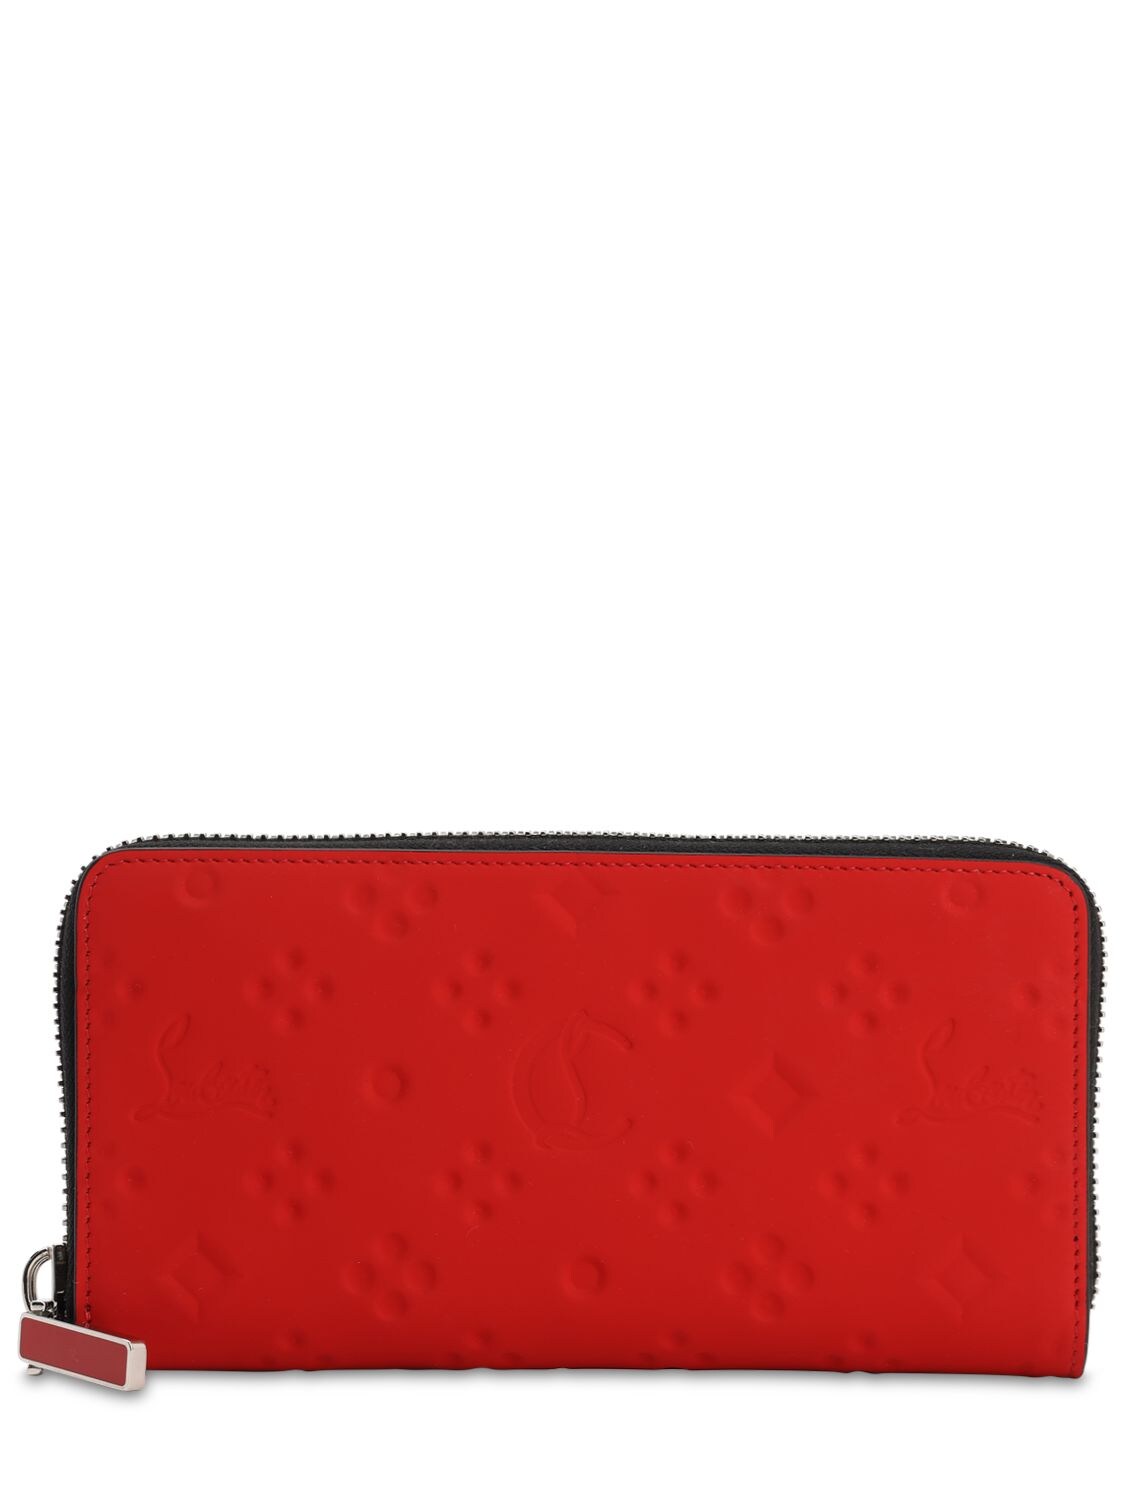 Christian Louboutin Panettone Embossed Logo Rubber Wallet In Red